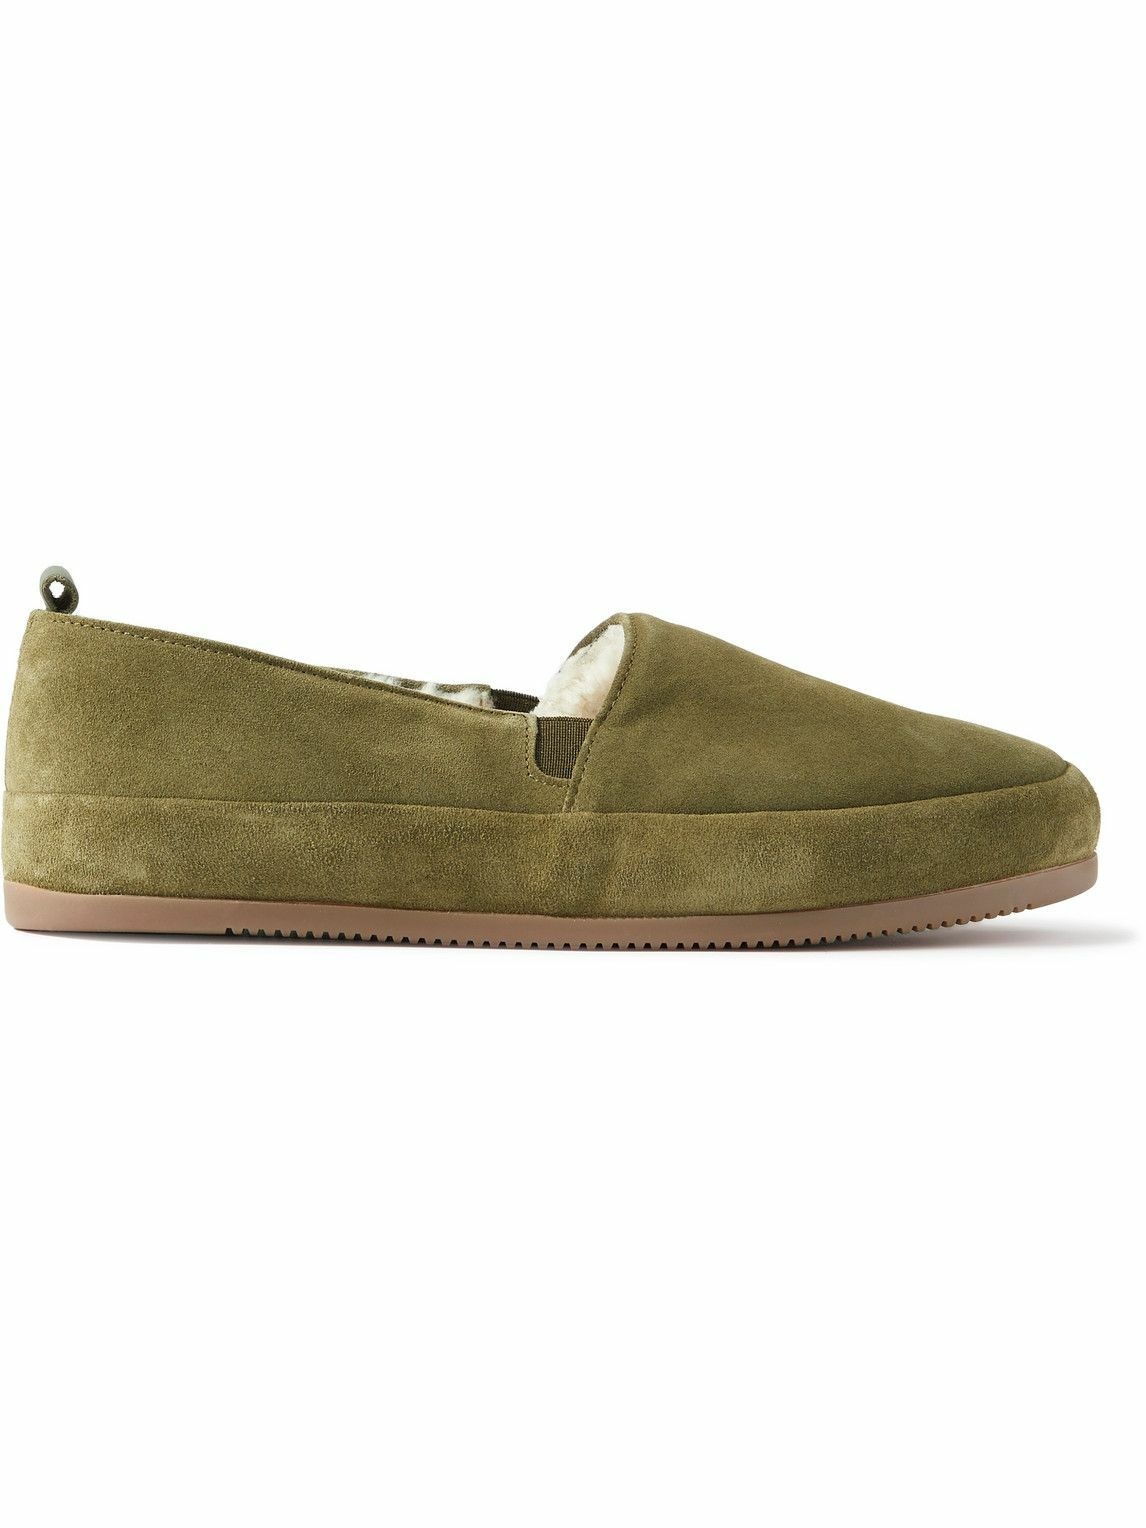 Mulo - Shearling-Lined Suede Slippers - Green Mulo